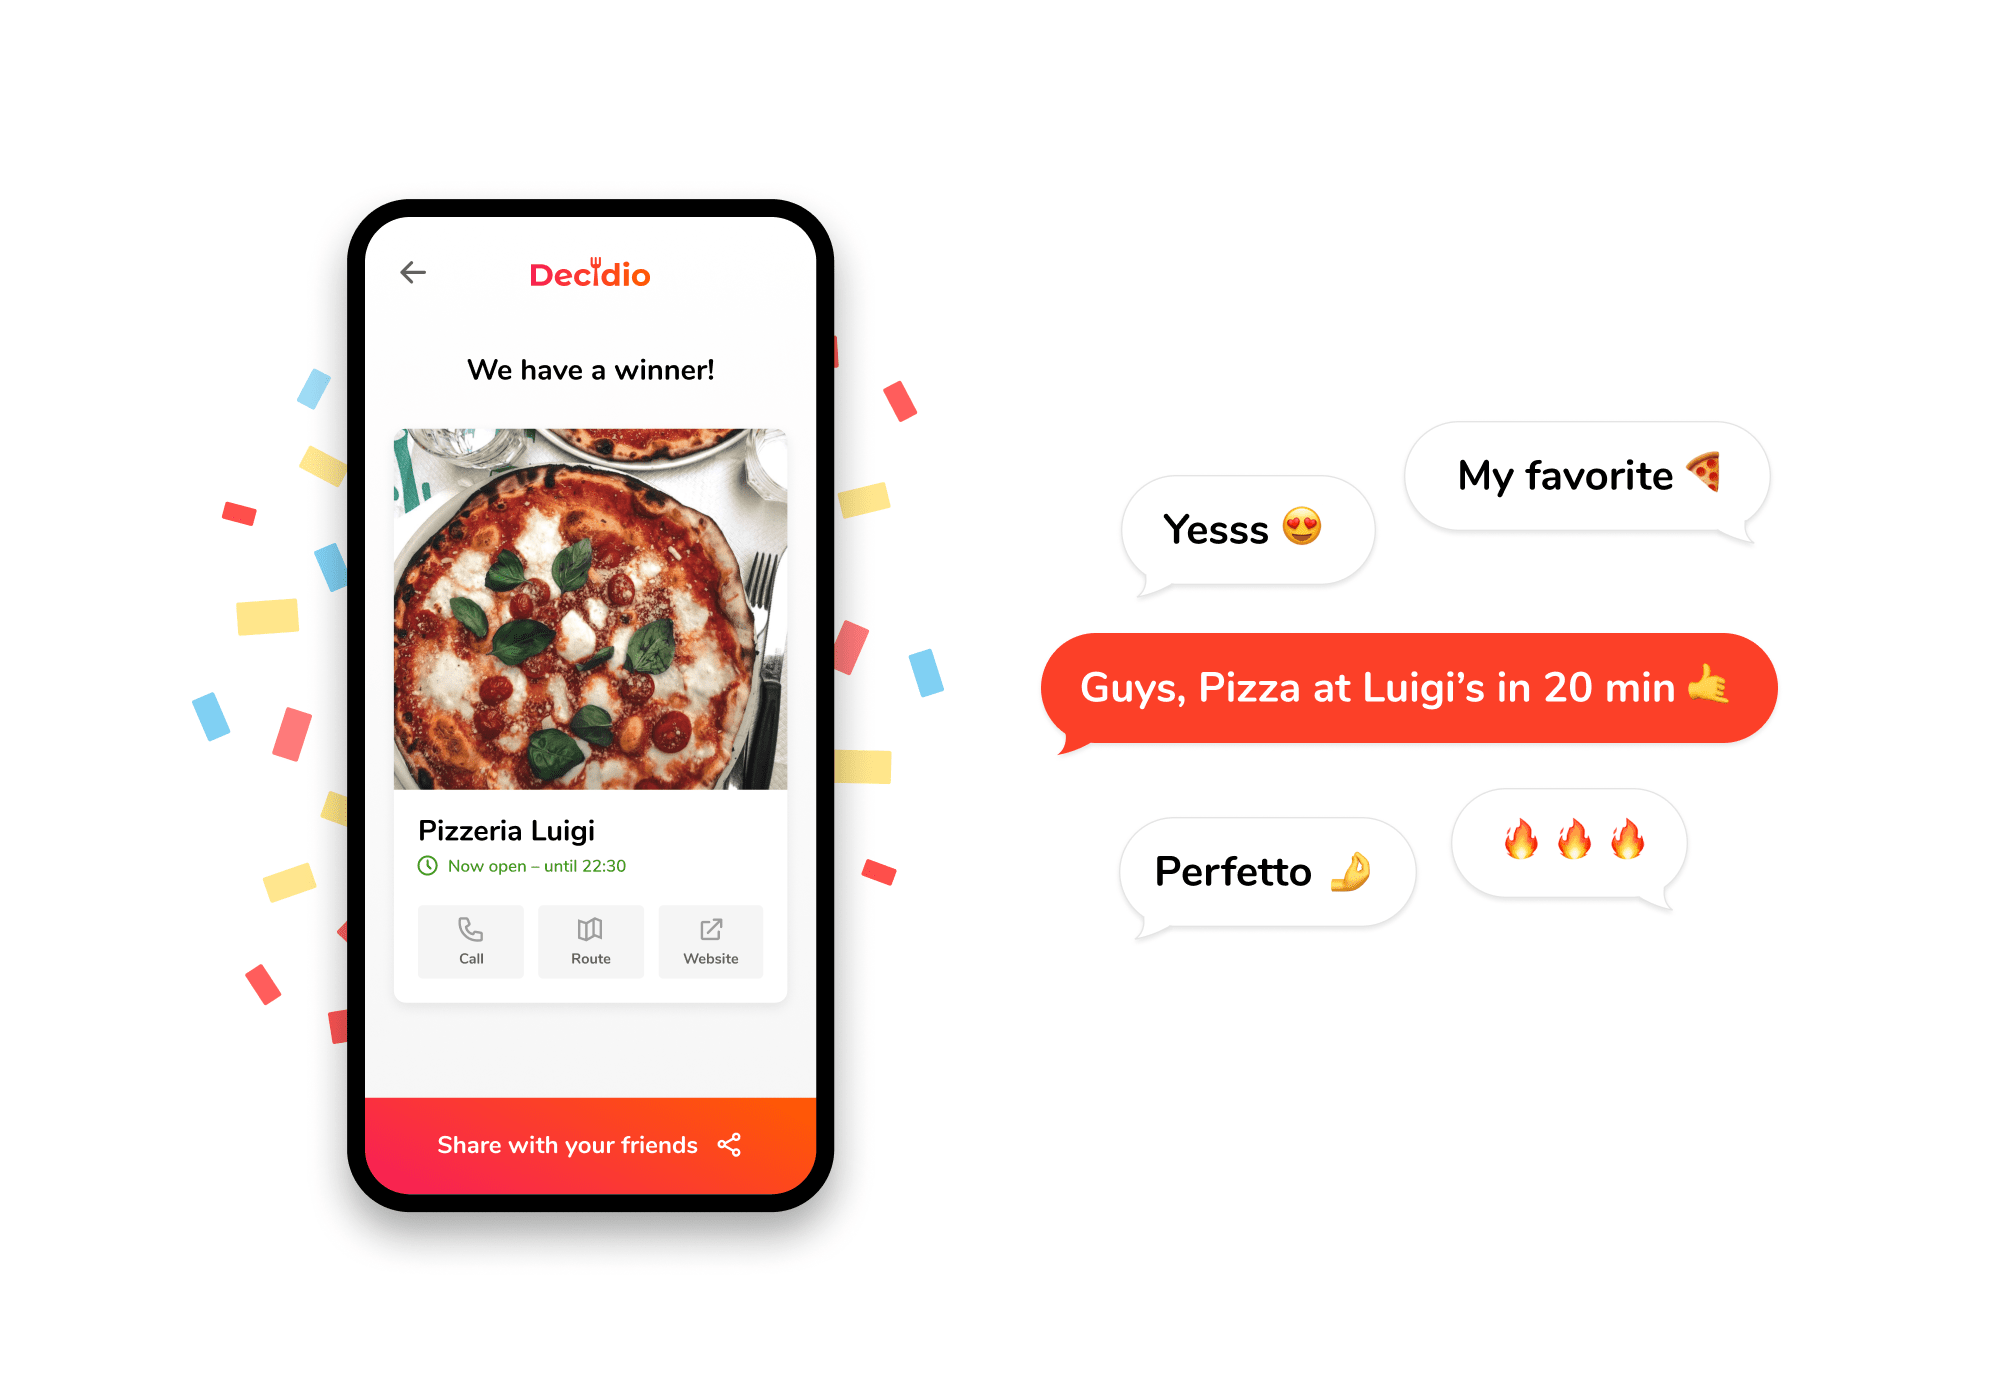 Decidio App – the restaurant with the most likes wins.